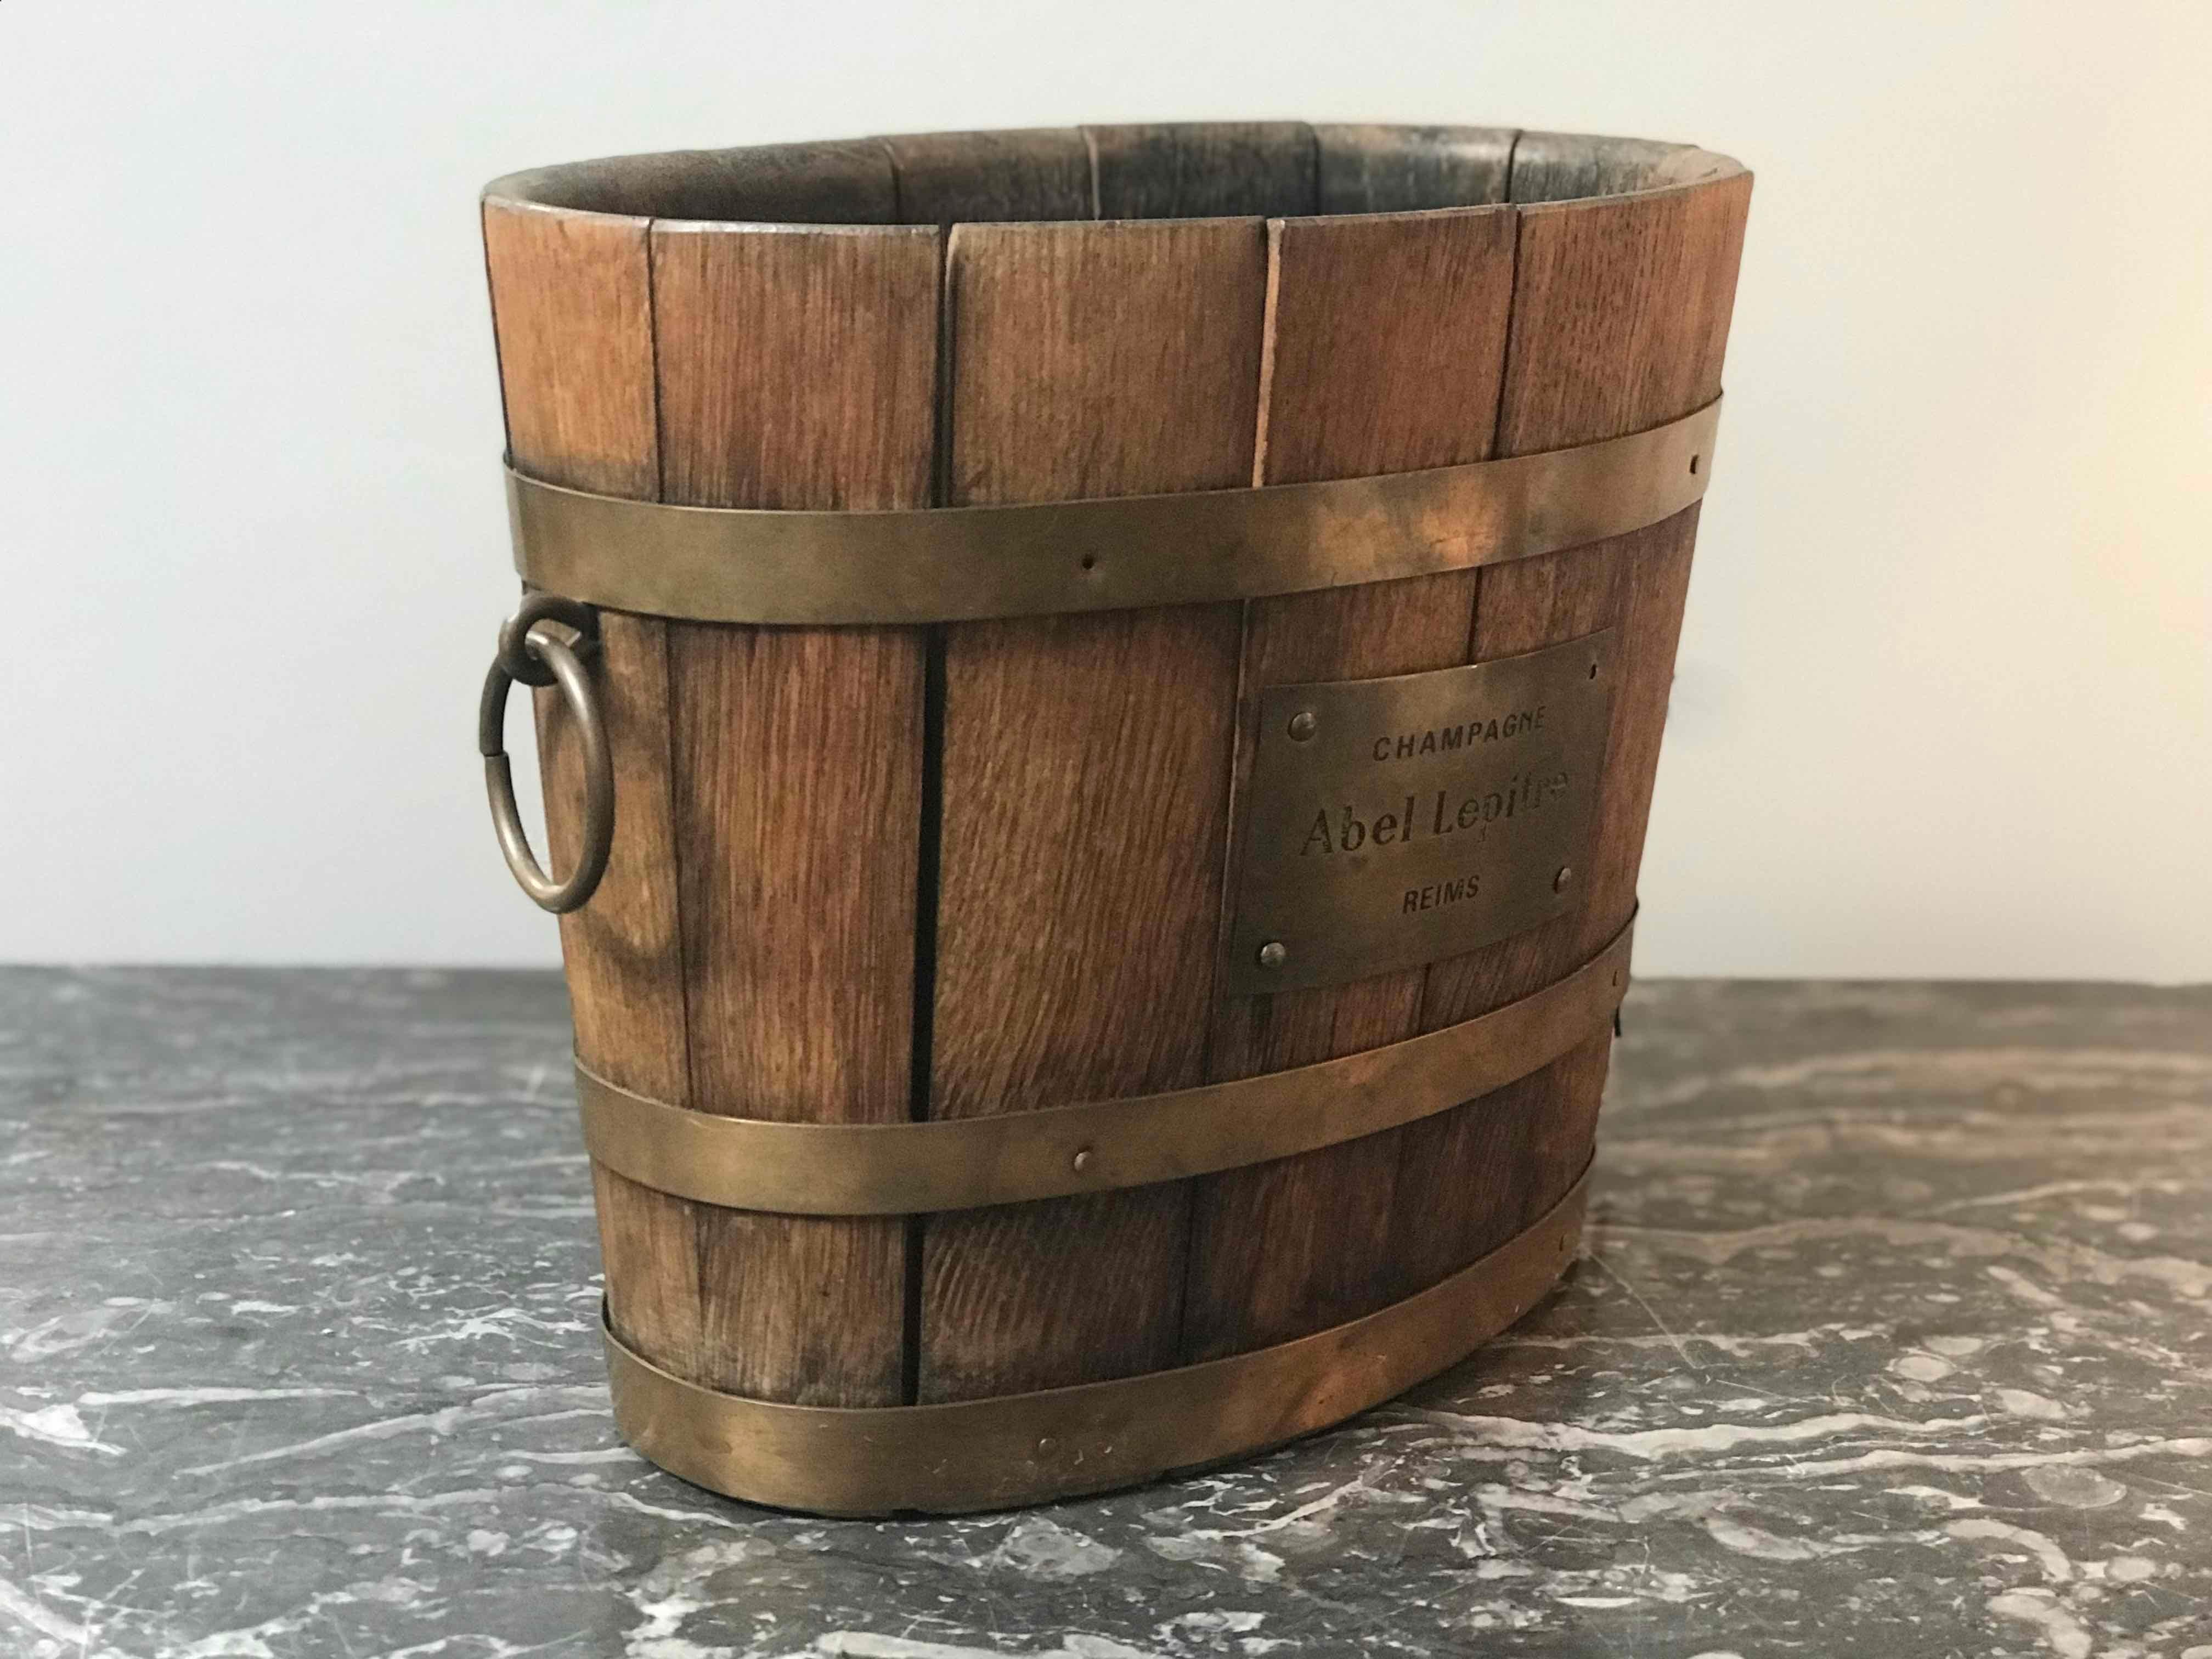 Vintage wood champagne bucket with brass label and handles from France.  